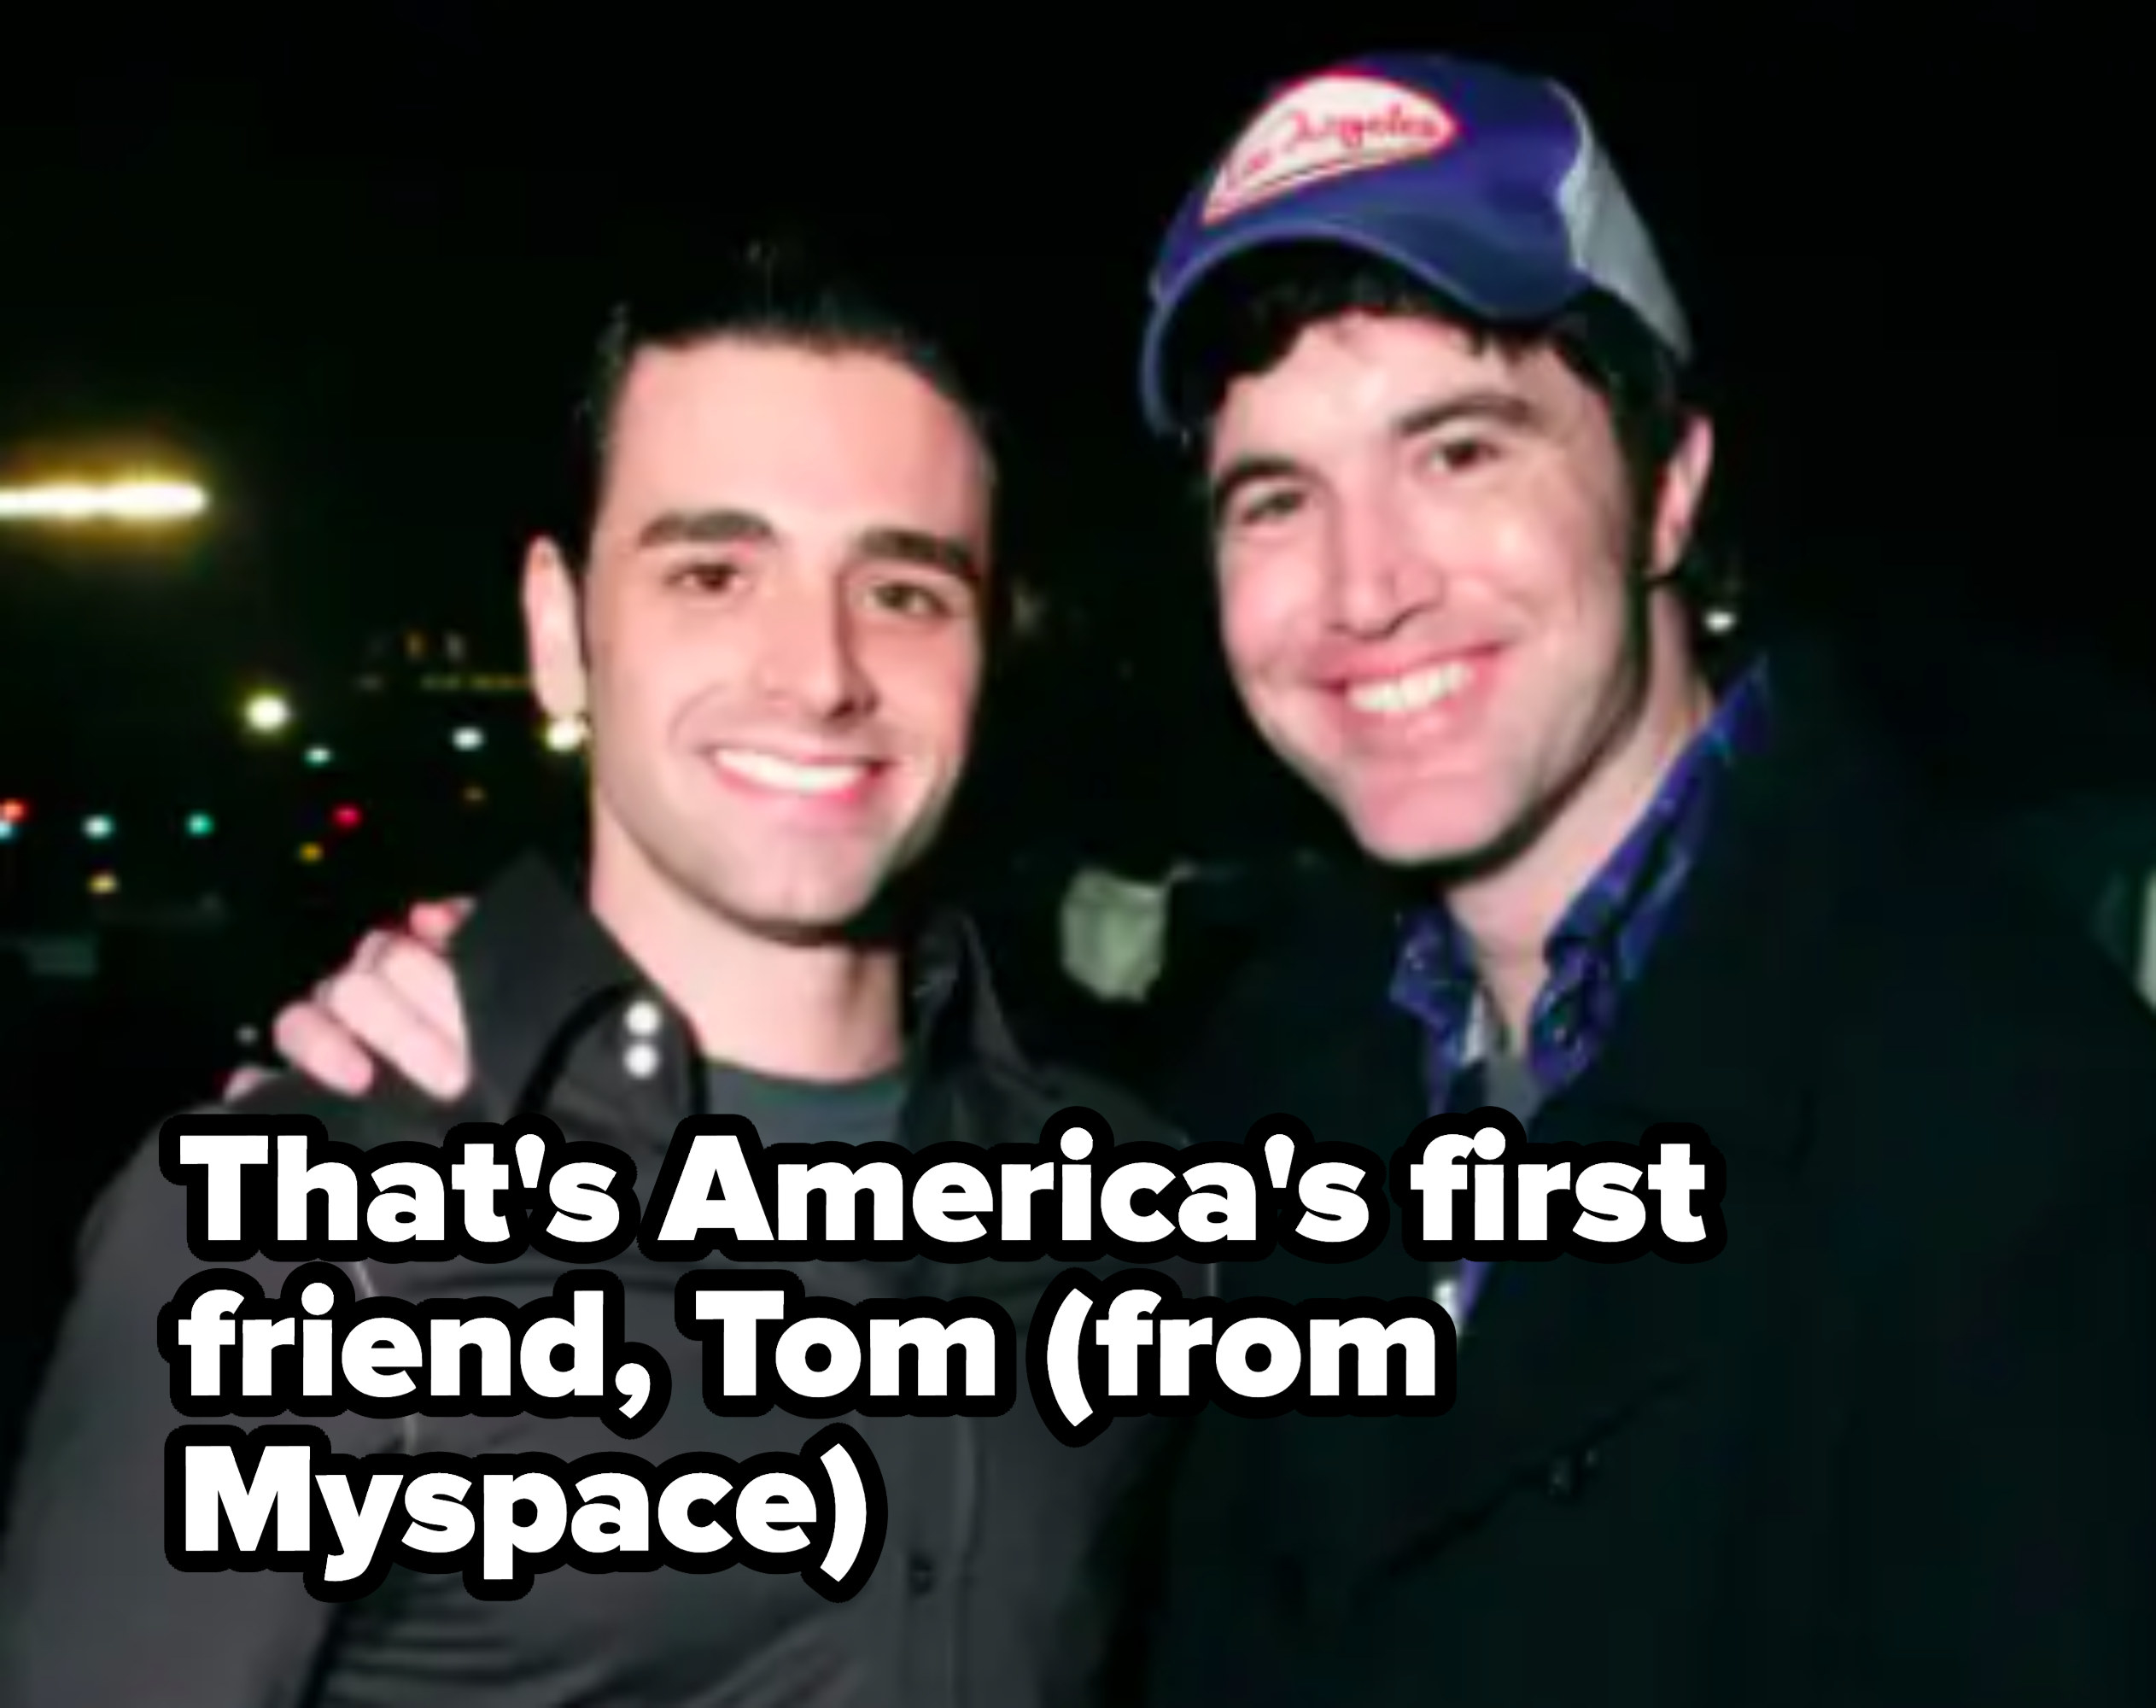 tom from myspace with his arm around some man